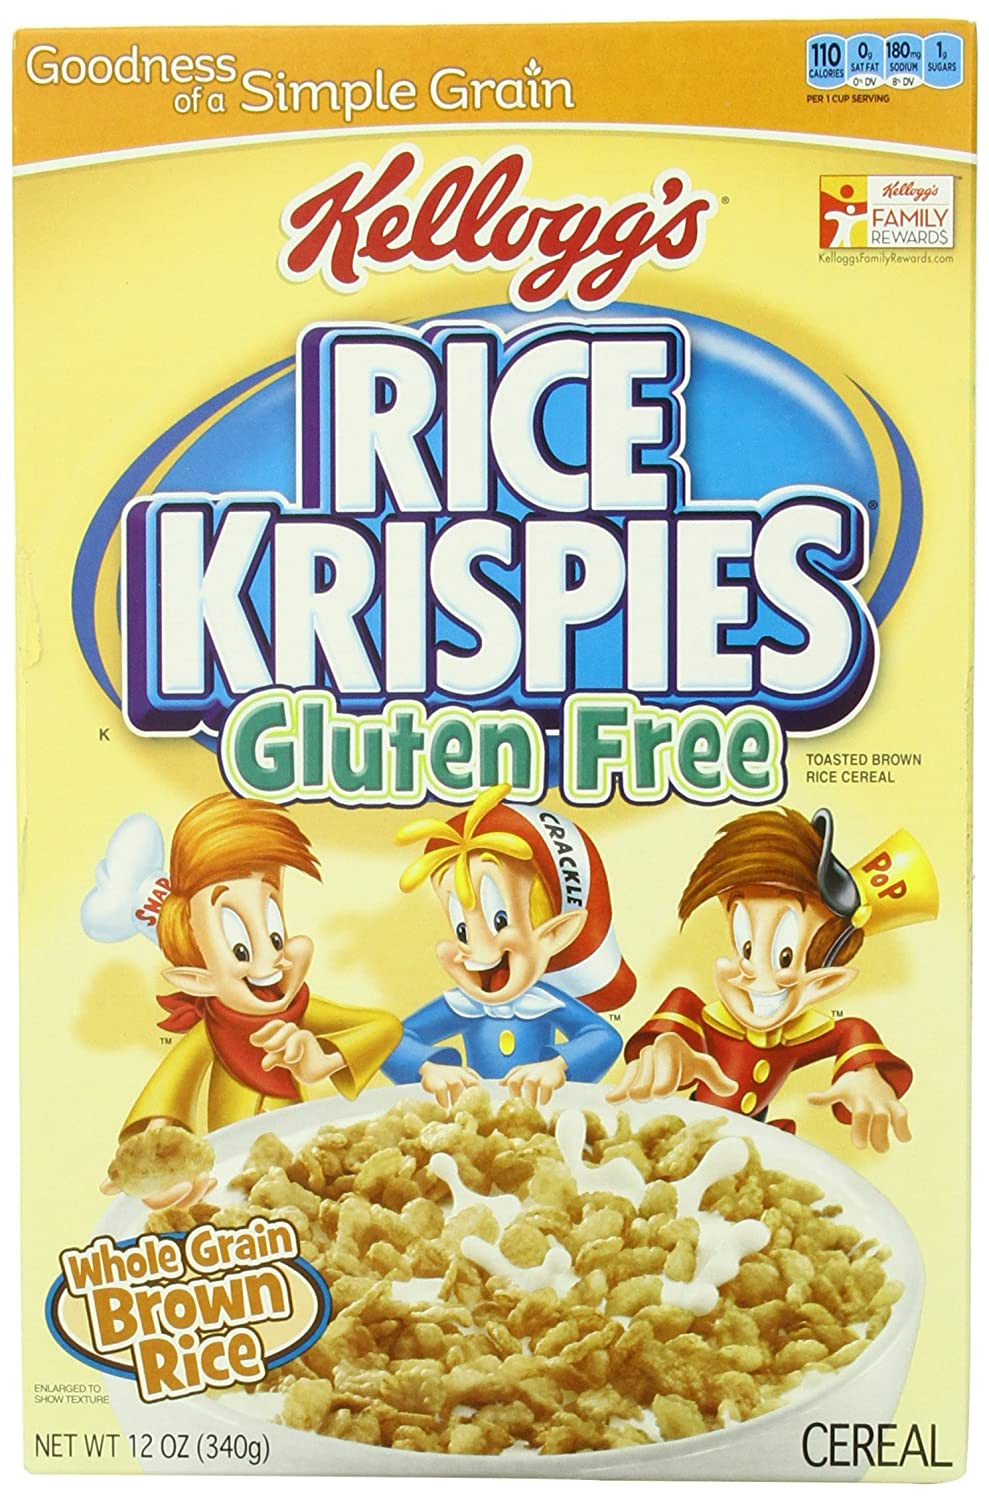 Crispy Brown Rice Cereal
 Brown Rice Crispy Cereal Nutrition Facts